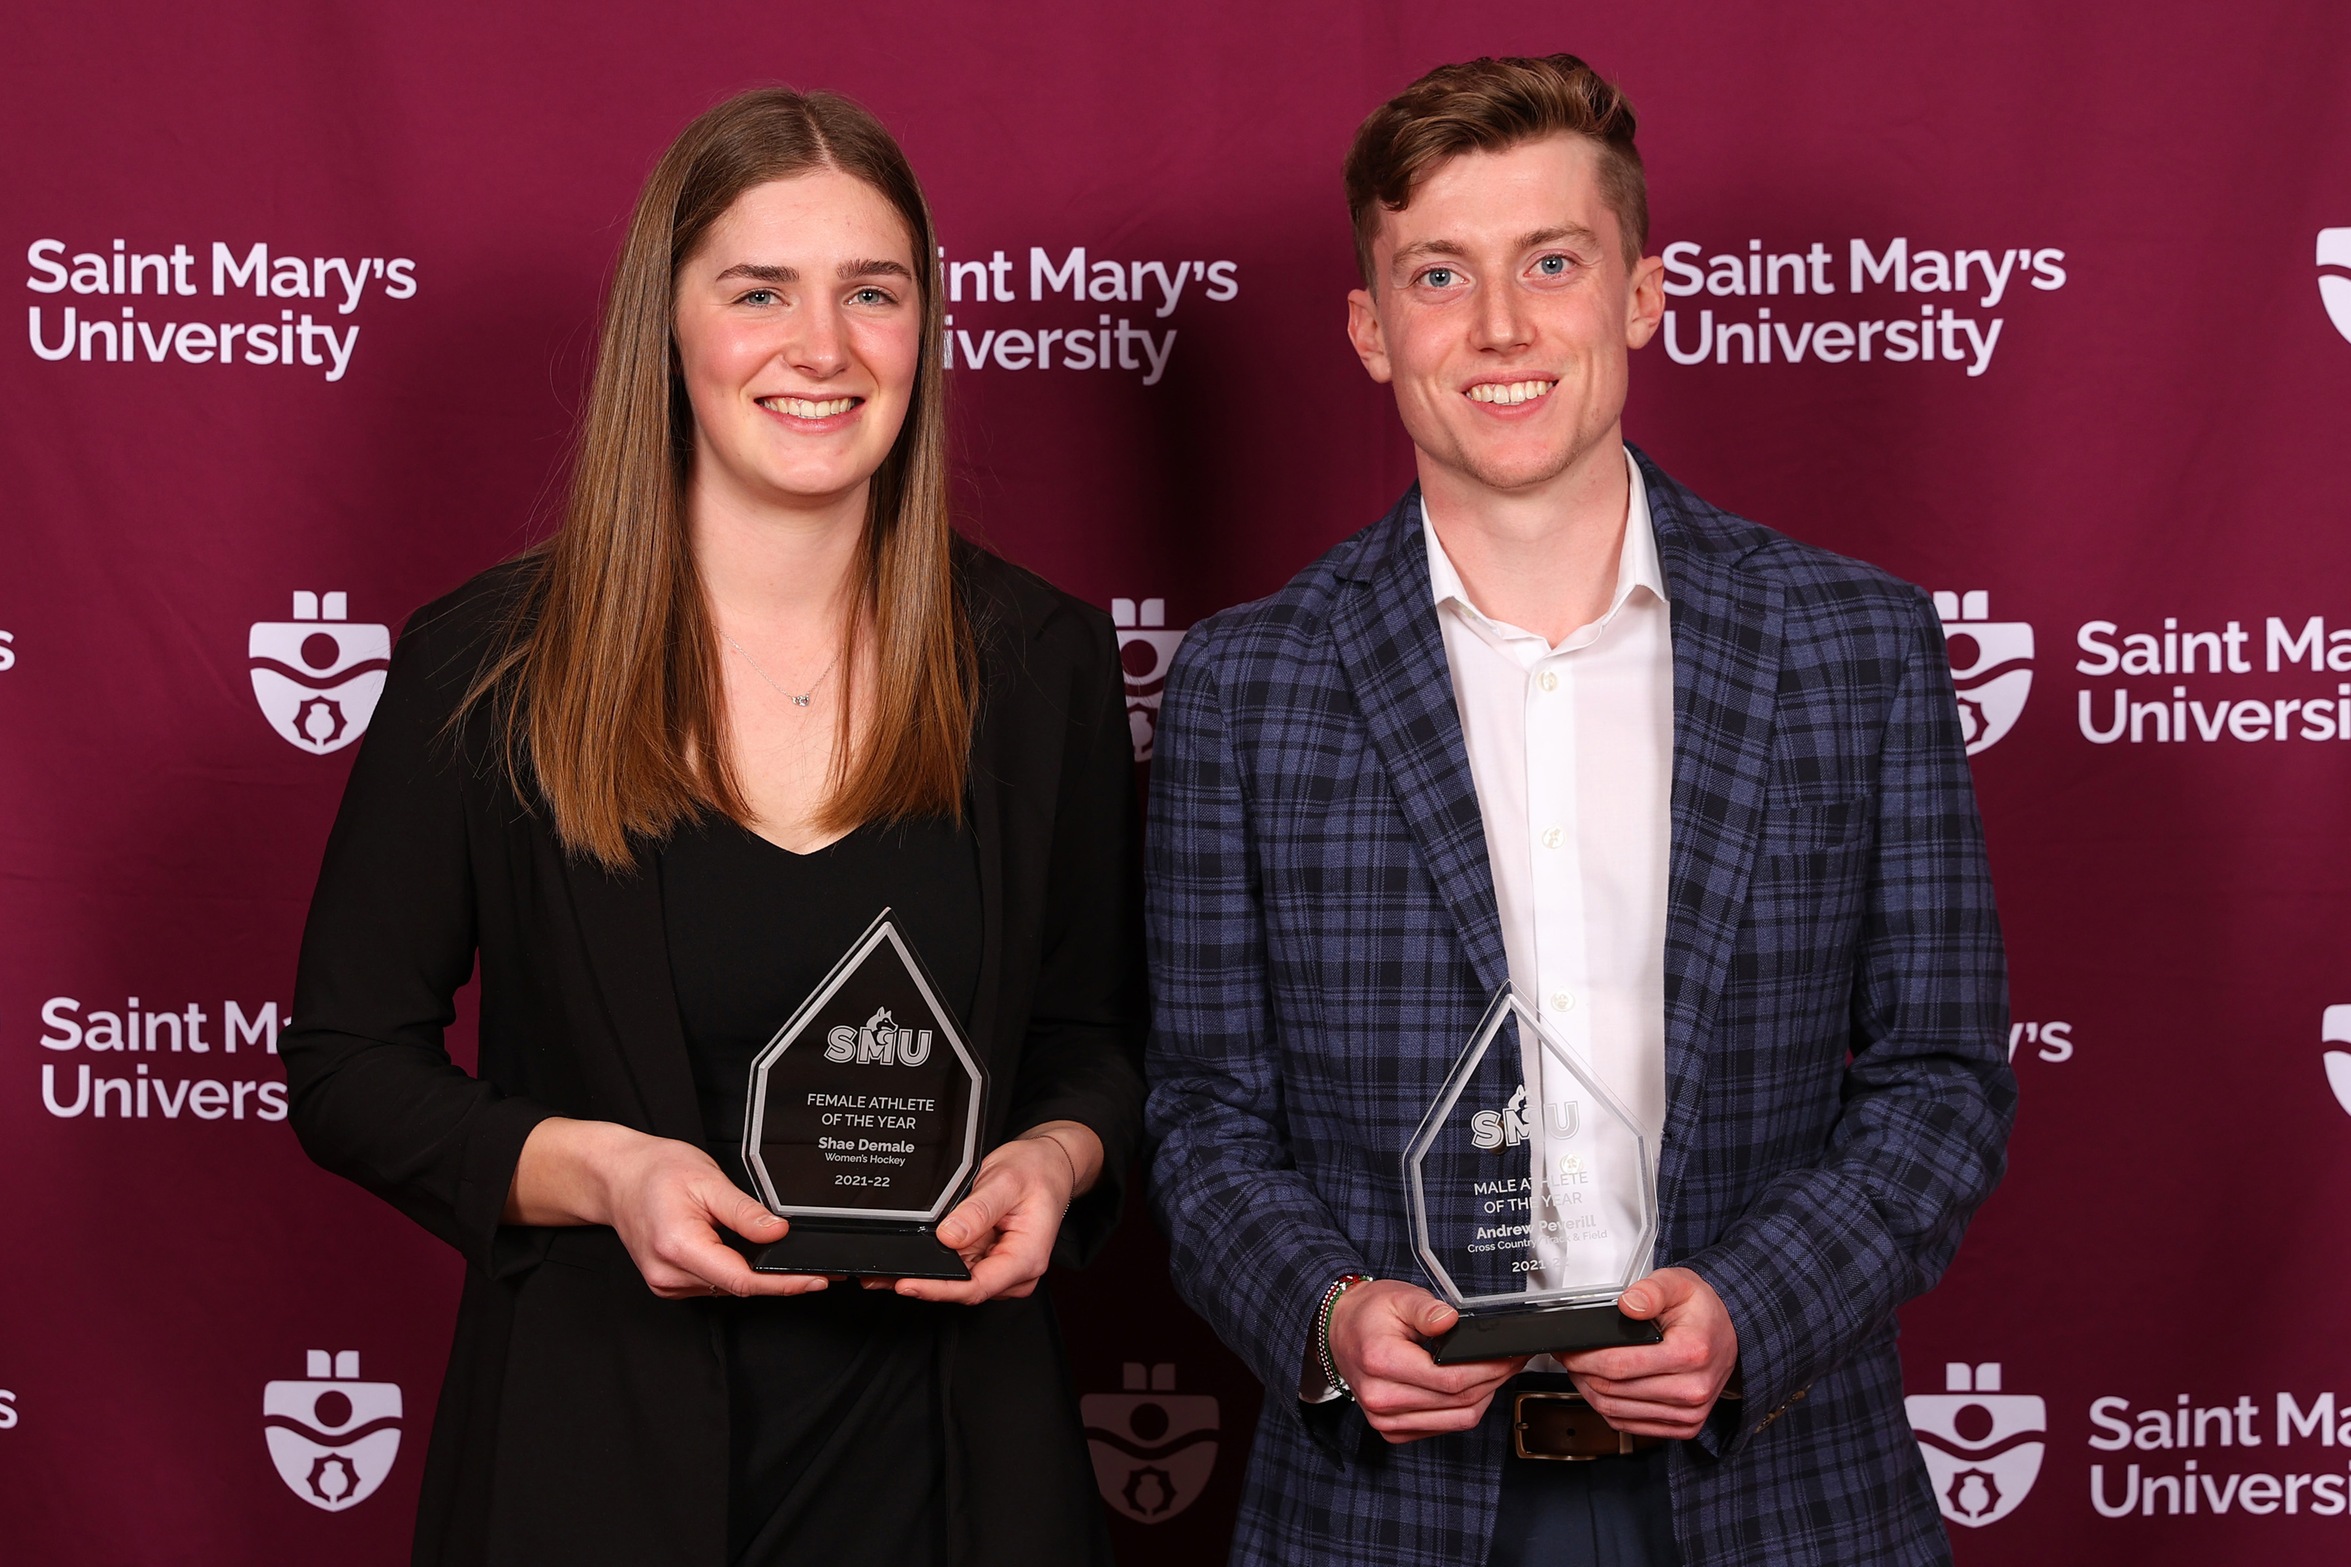 Shae Demale (left), a forward for Huskies Women's Hockey, and Andrew Peverill (right), from Huskies Cross Country / Track & Field, were named the Huskies Athletes of the Year at the 2021-22 Award's Banquet on April 4, 2022.